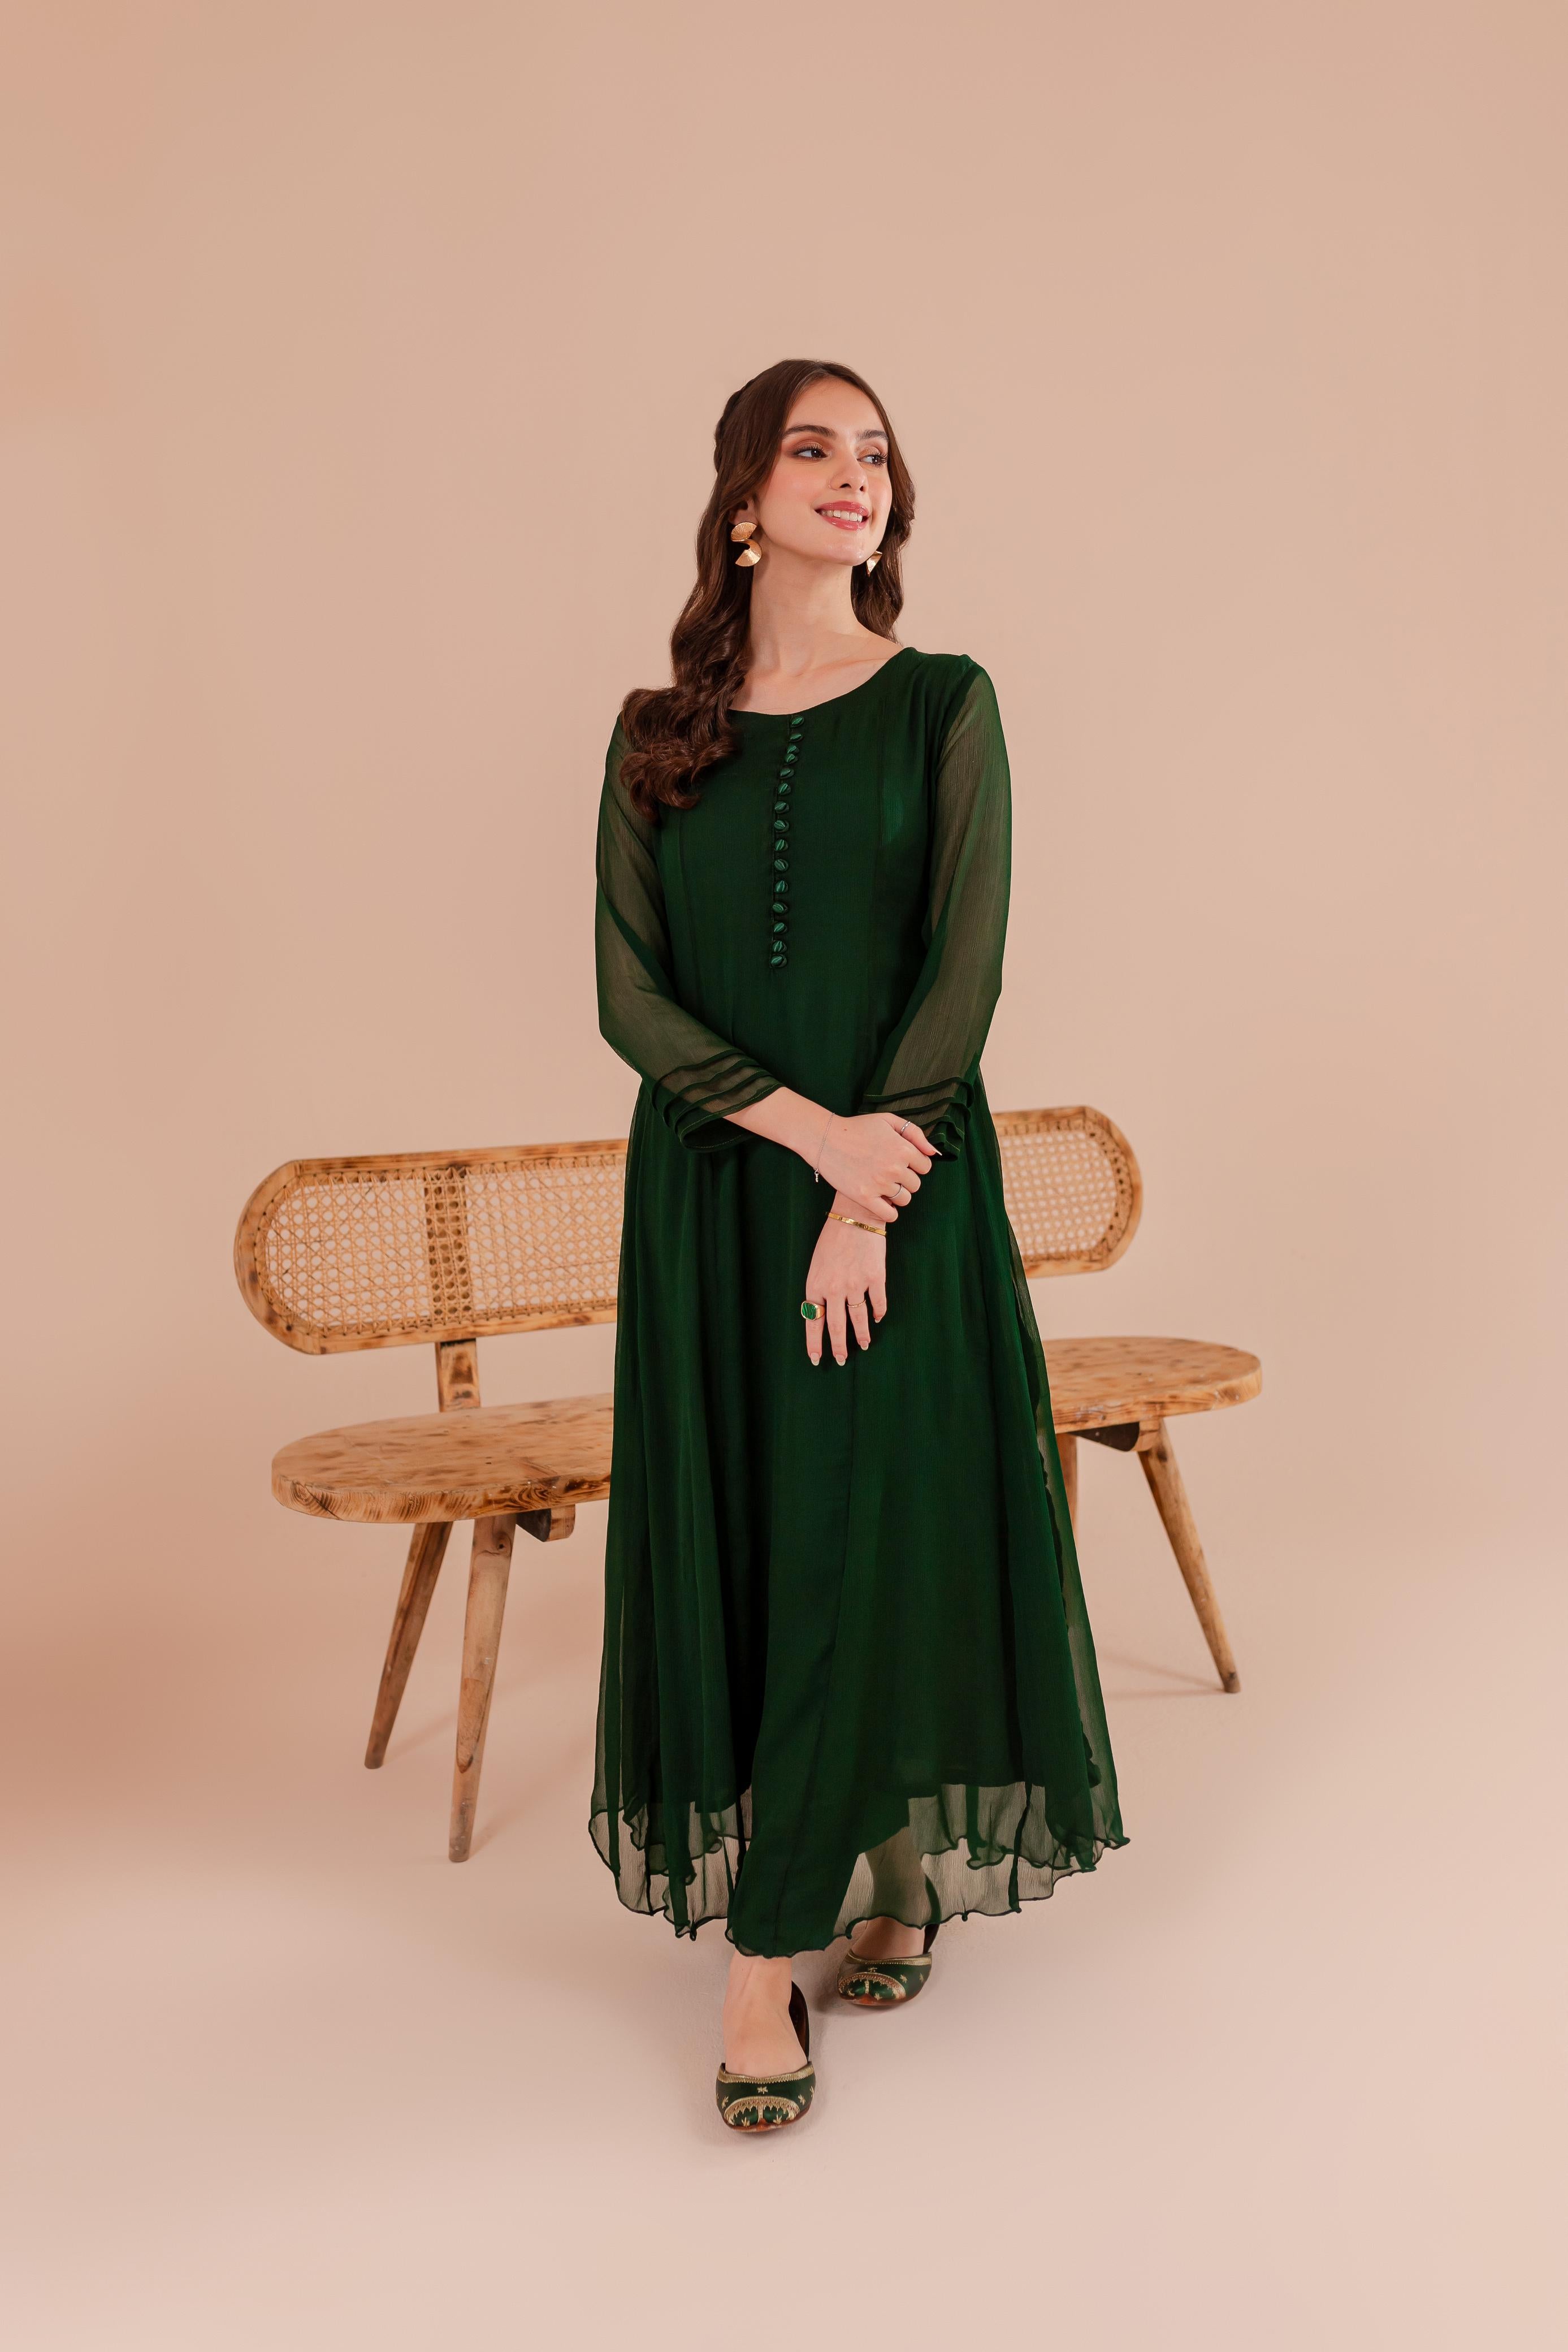 Buy Bottle Green Dress With Embroidery Online - Shop for W